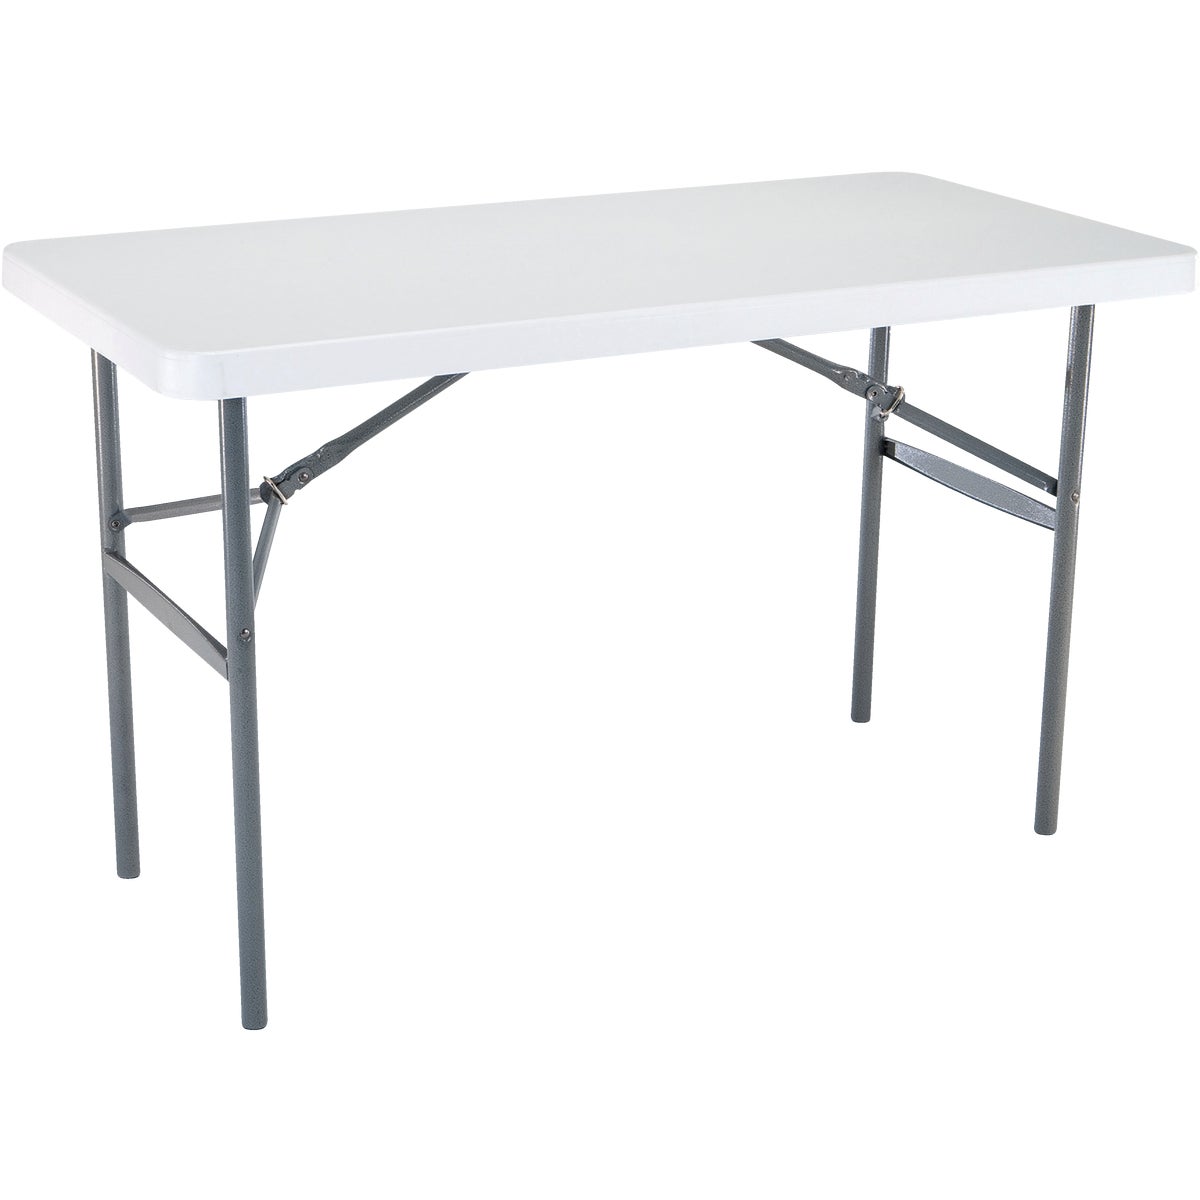 Item 600075, Lifetime folding tables are constructed of UV protected high-density 